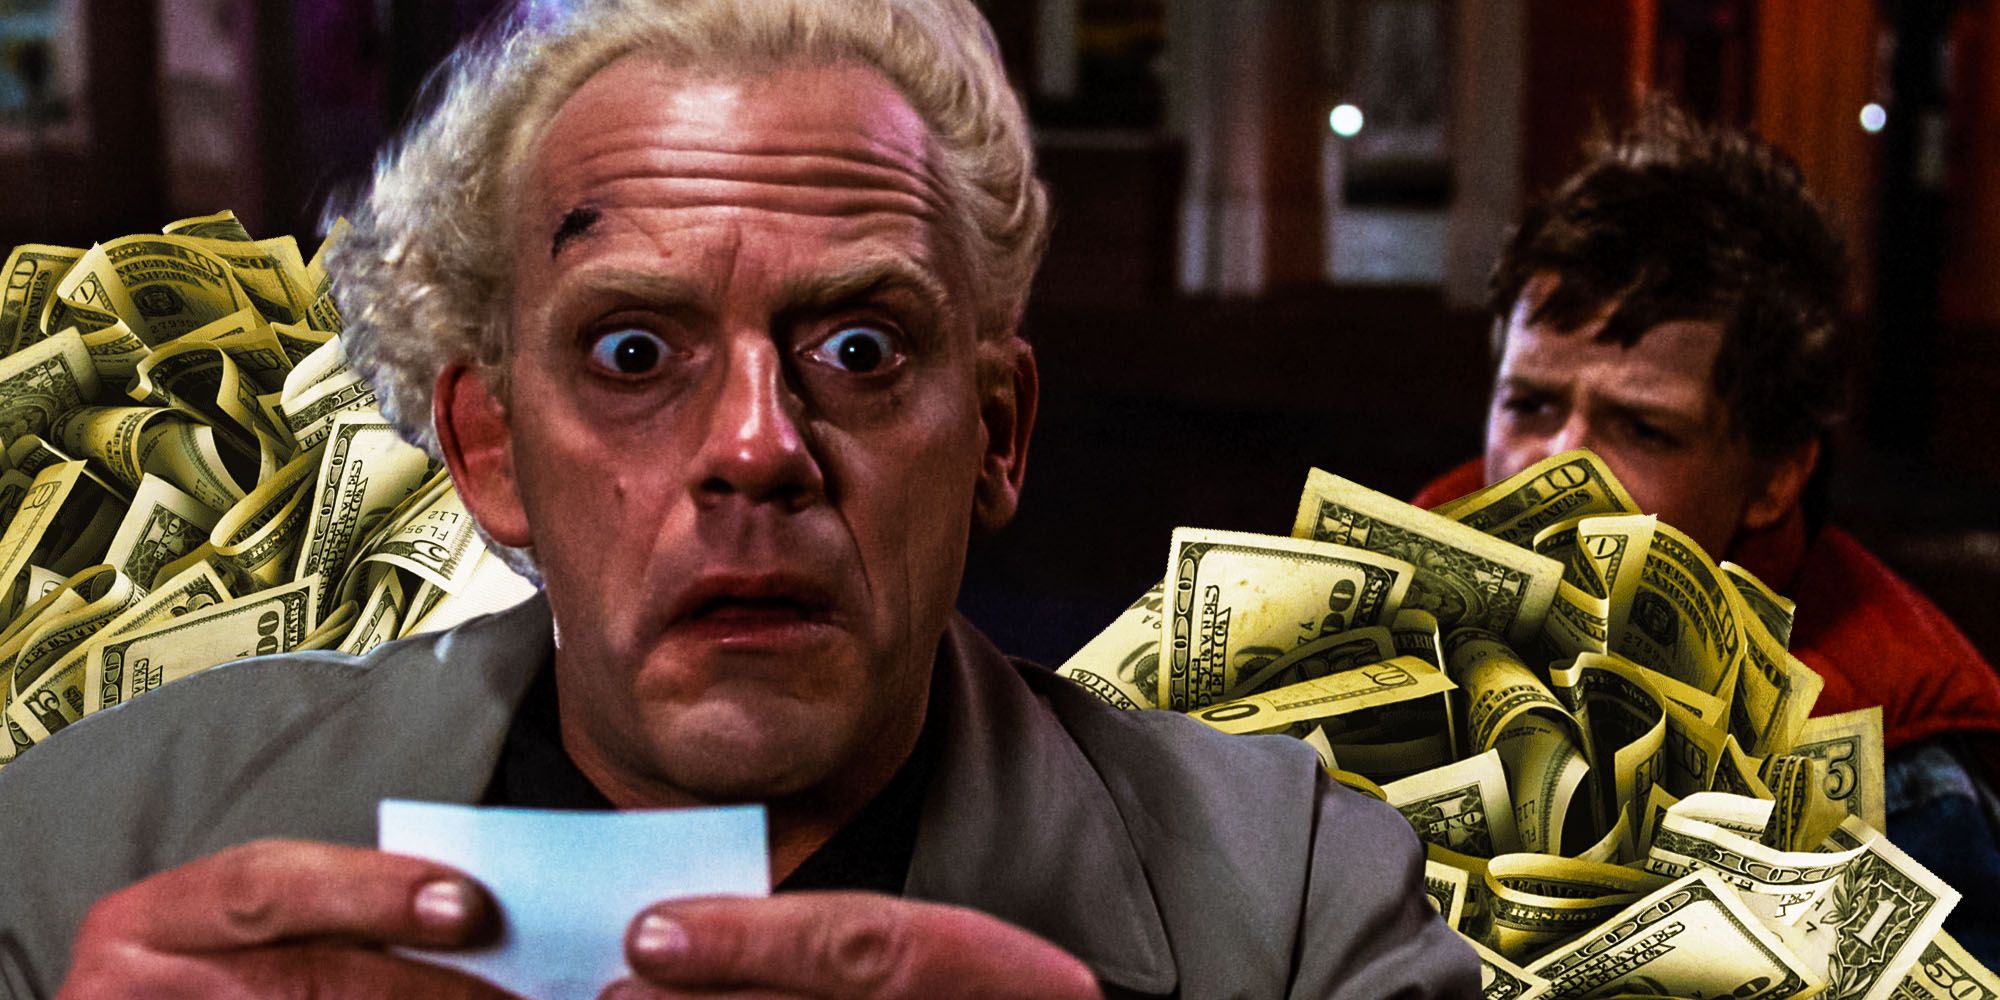 Doc Brown from Back to the Future with images of cash.